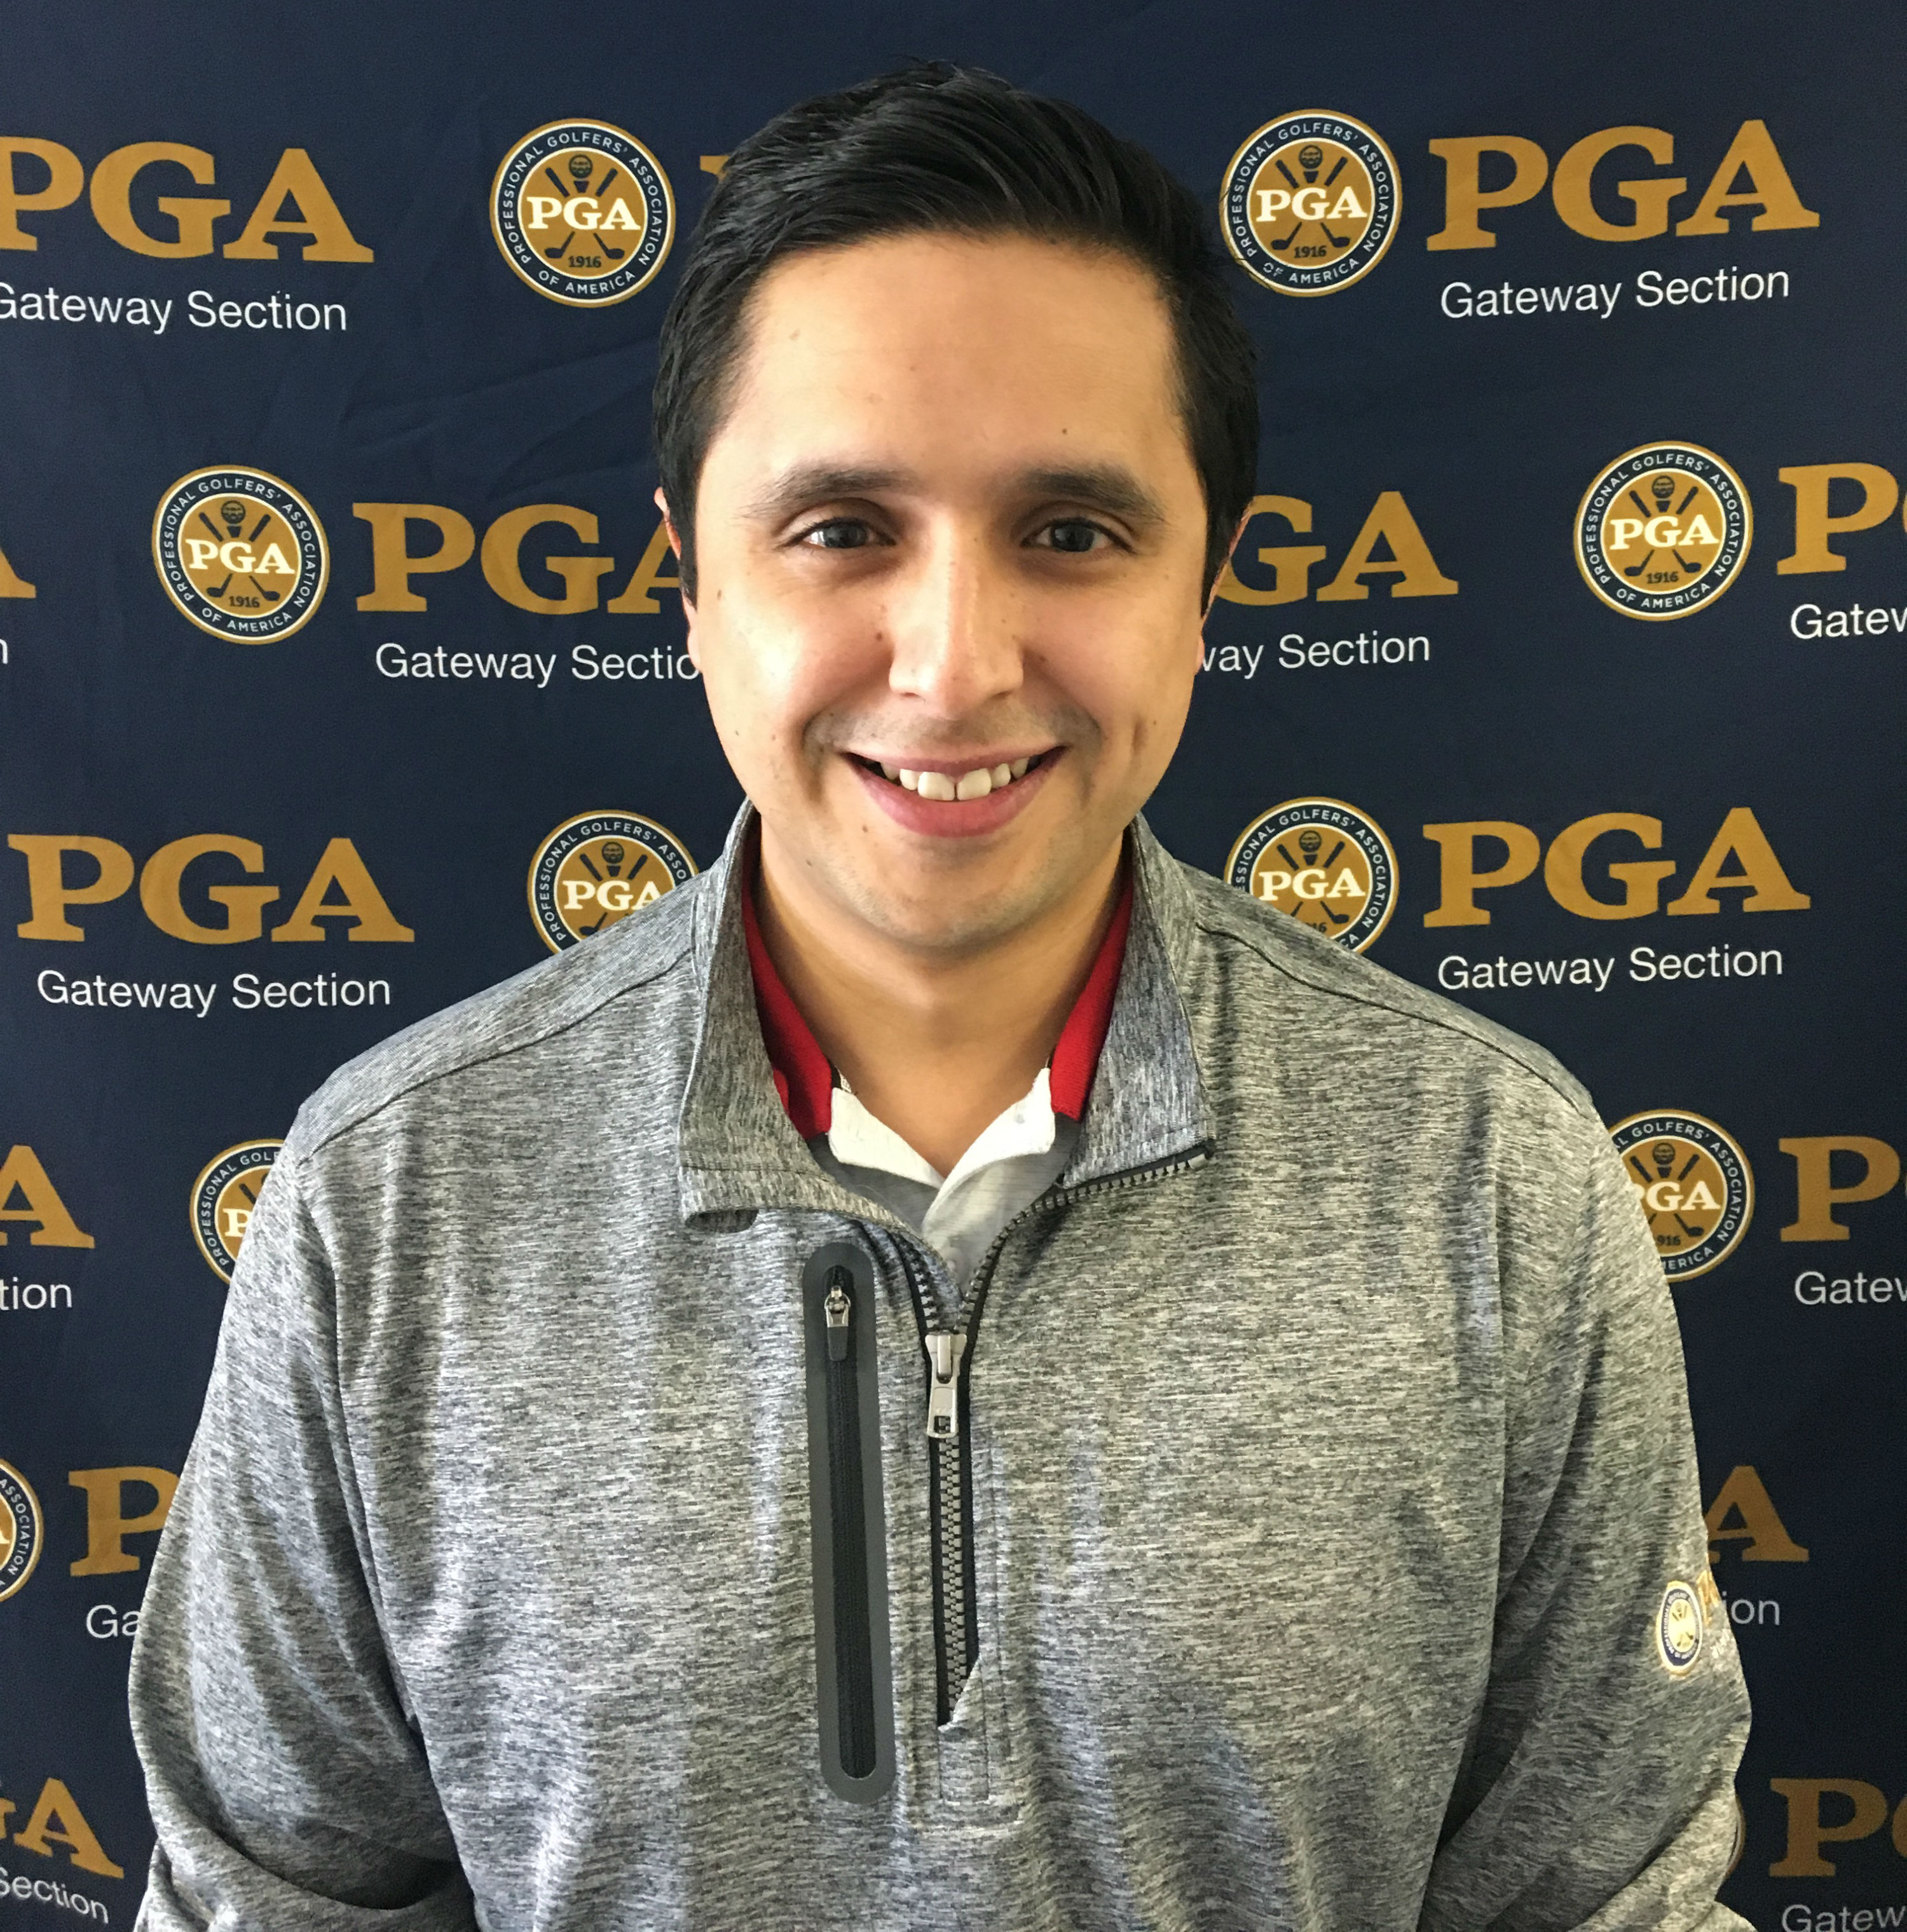 GATEWAY PGA SECTION SELECTS FERNANDO MOLINA AS ITS FIRST PGA WORKS FELLOW